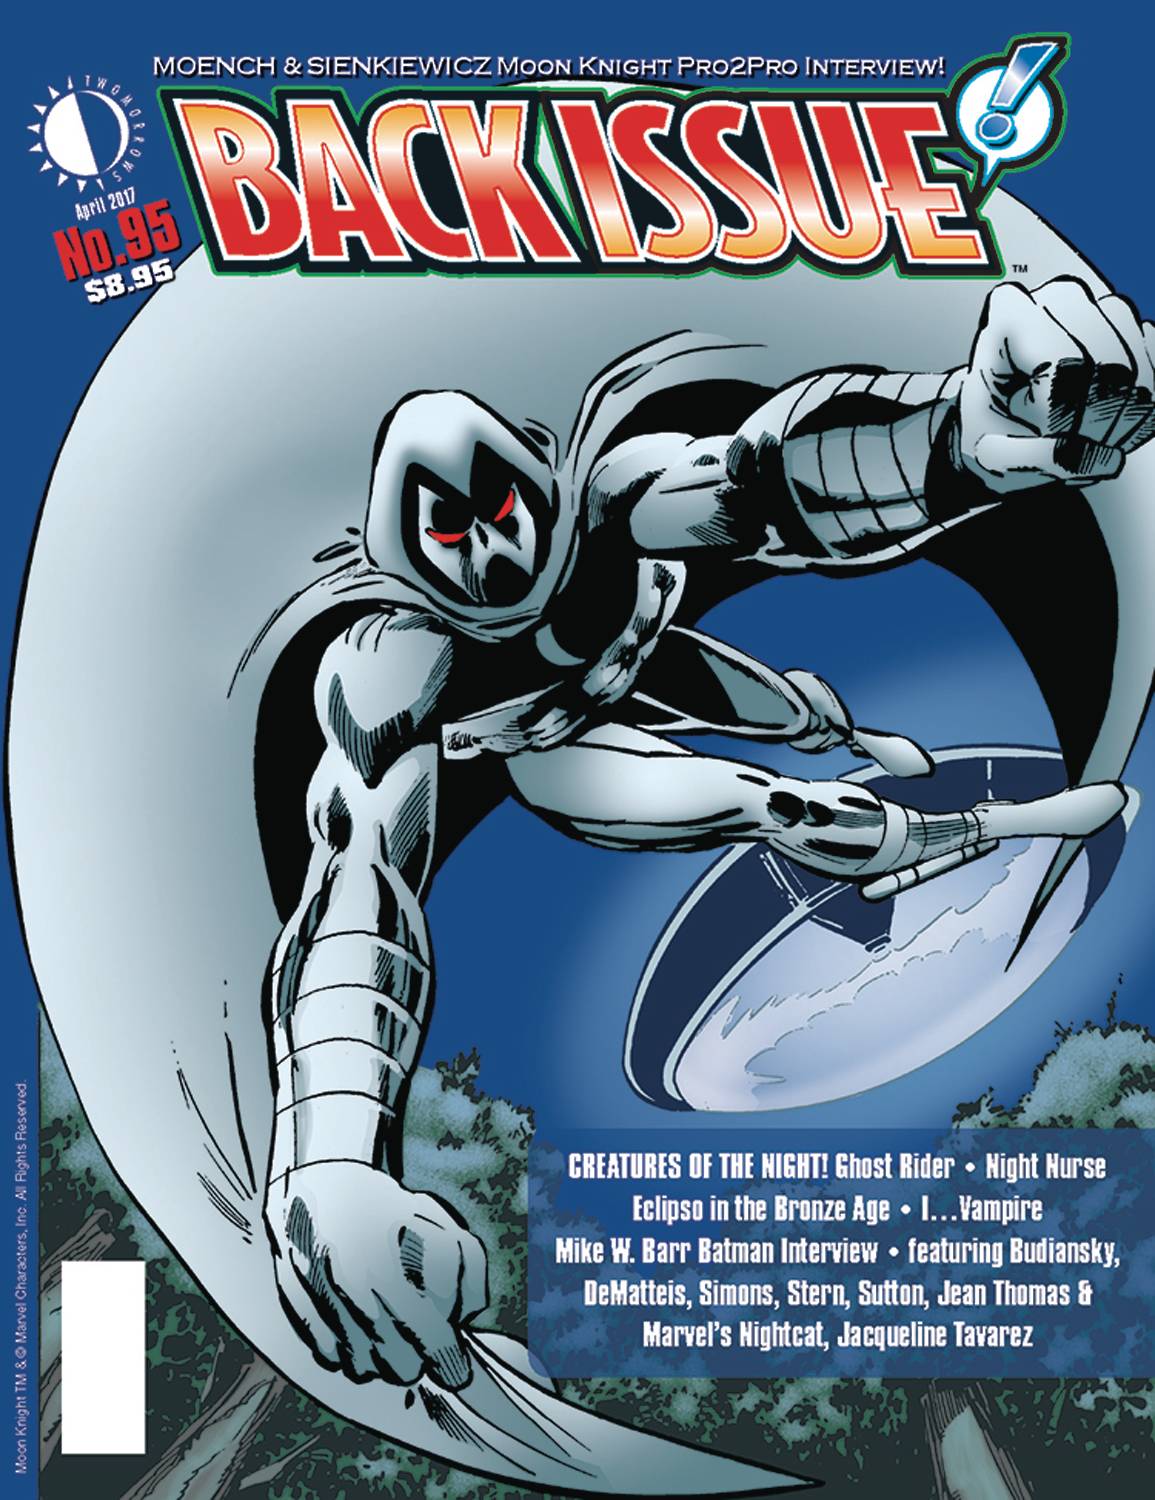 BACK ISSUE #95